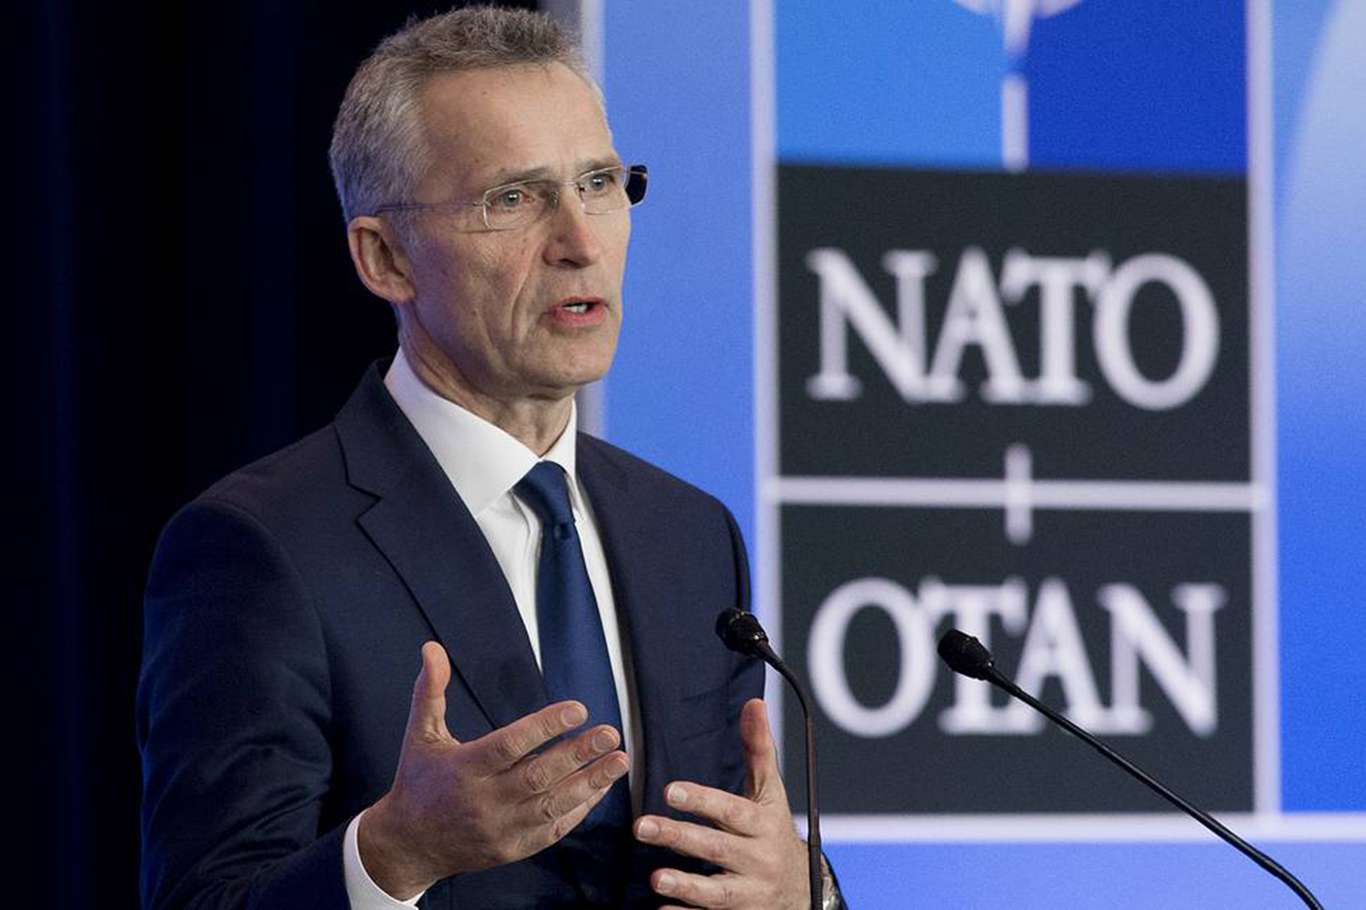 Explosion in Poland caused by Ukrainian air defense missile, NATO Chief says